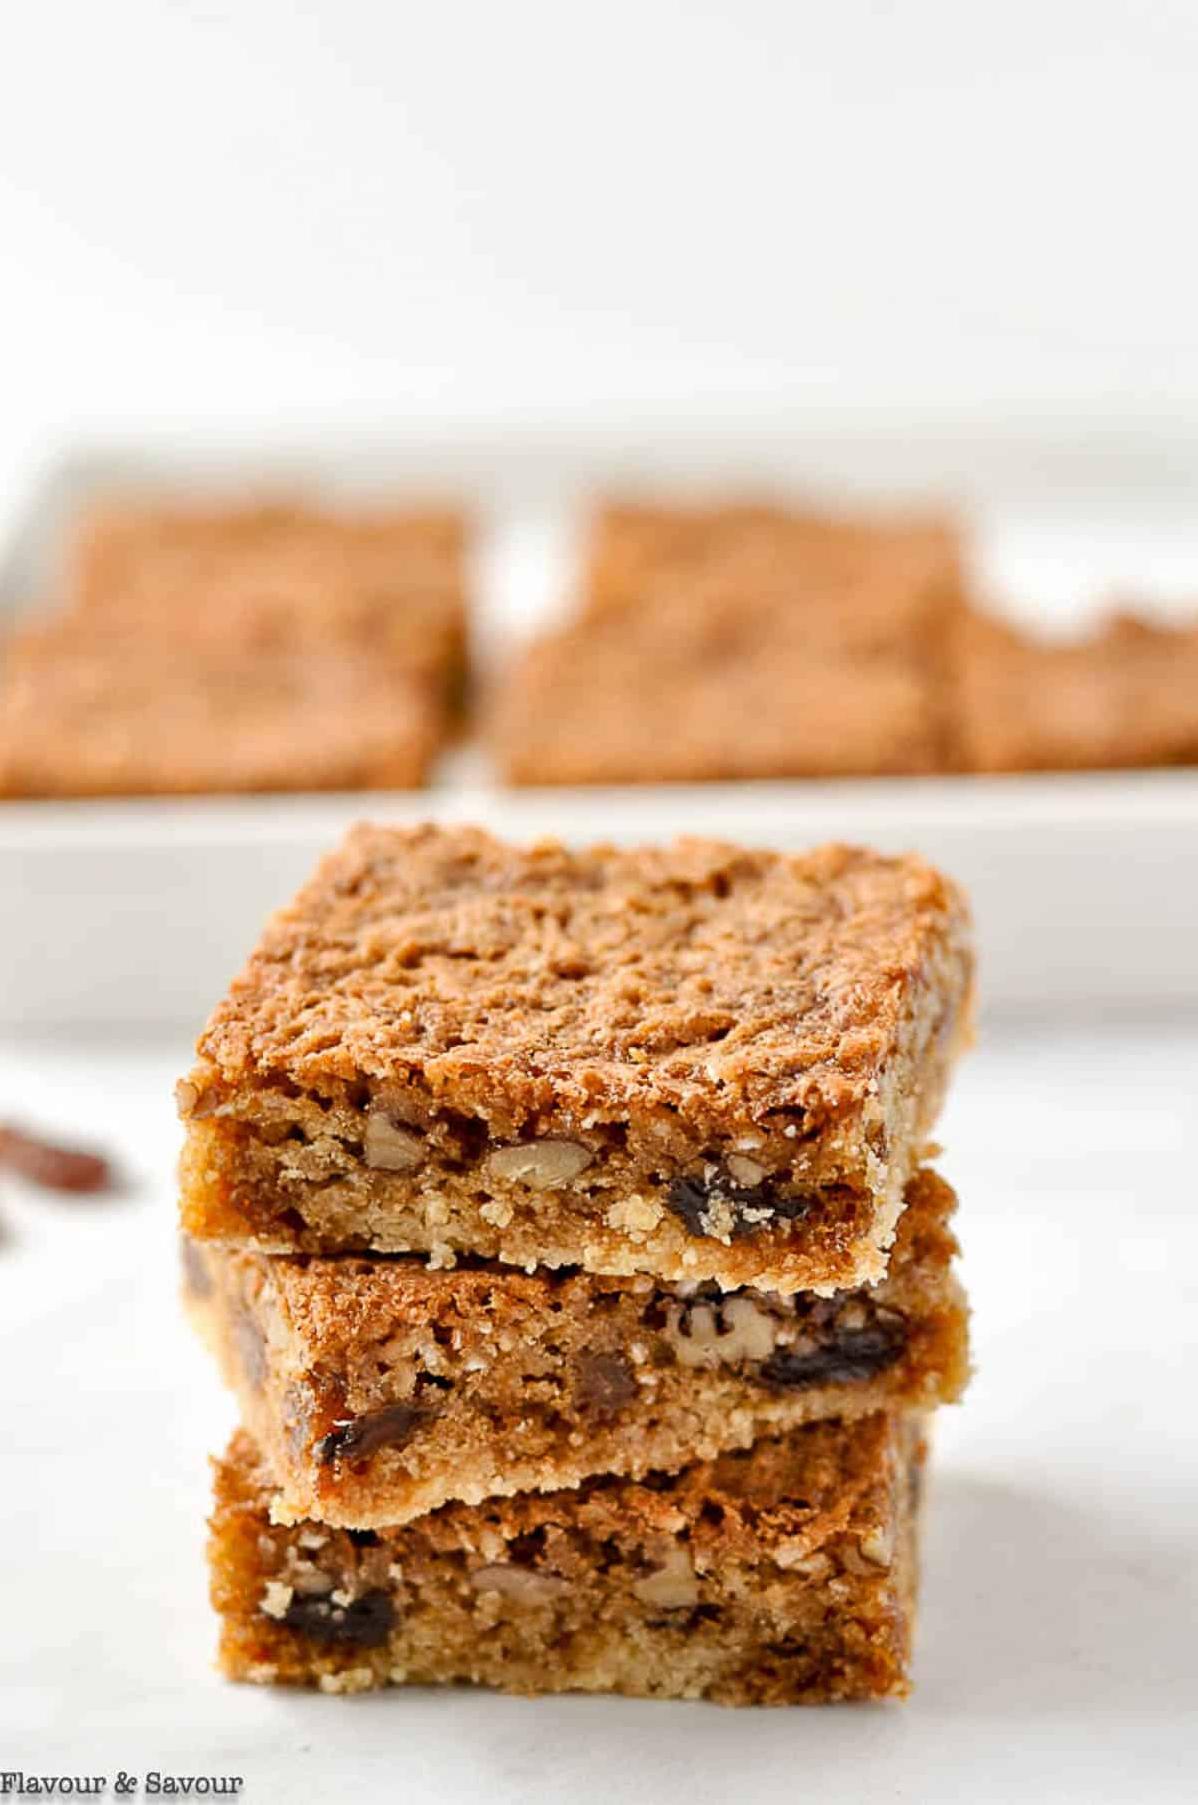  Get ready to lick your fingers with these gluten-free Peanut Butter Tart Squares.